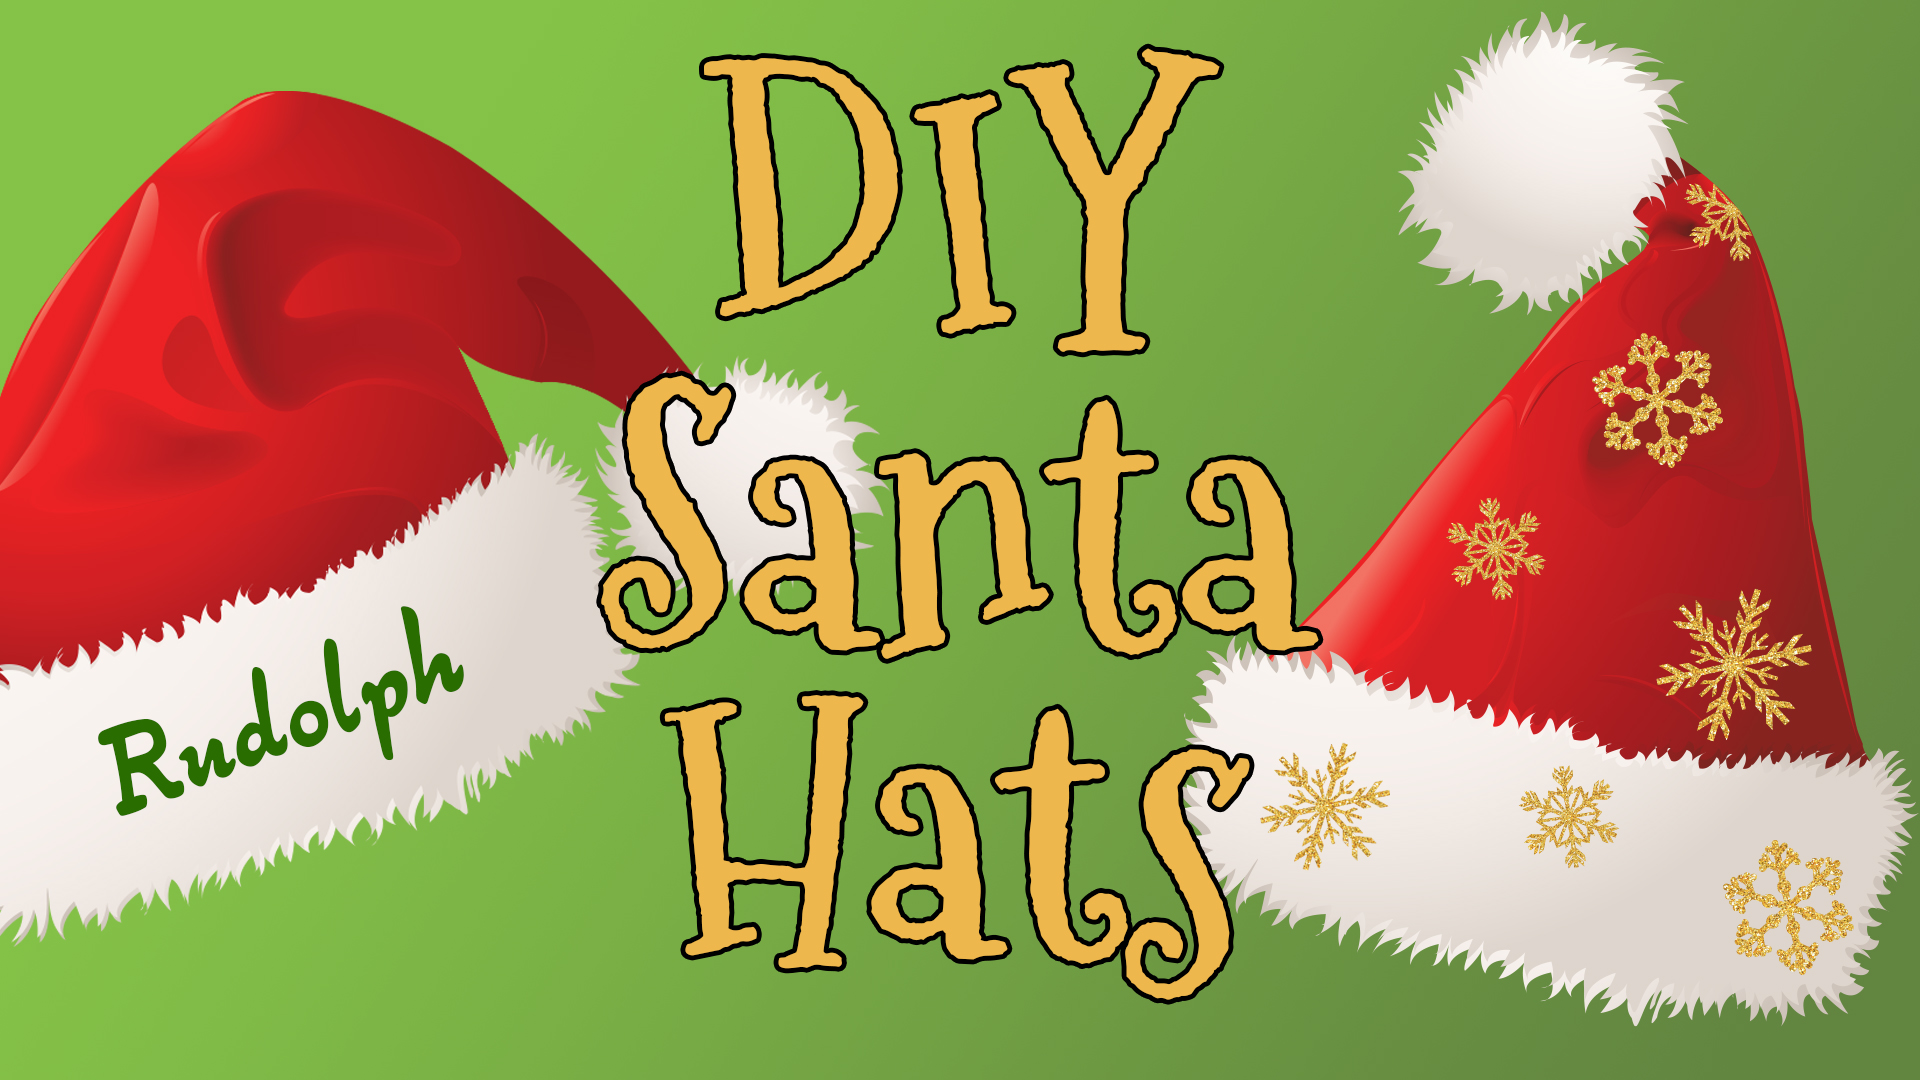 Image reads "DIY Santa Hats" in gold against a green gradient background. There is a hat with glitter snowflakes to the right of the title. There is a hat with the name Rudolph in green to the left of the title. 